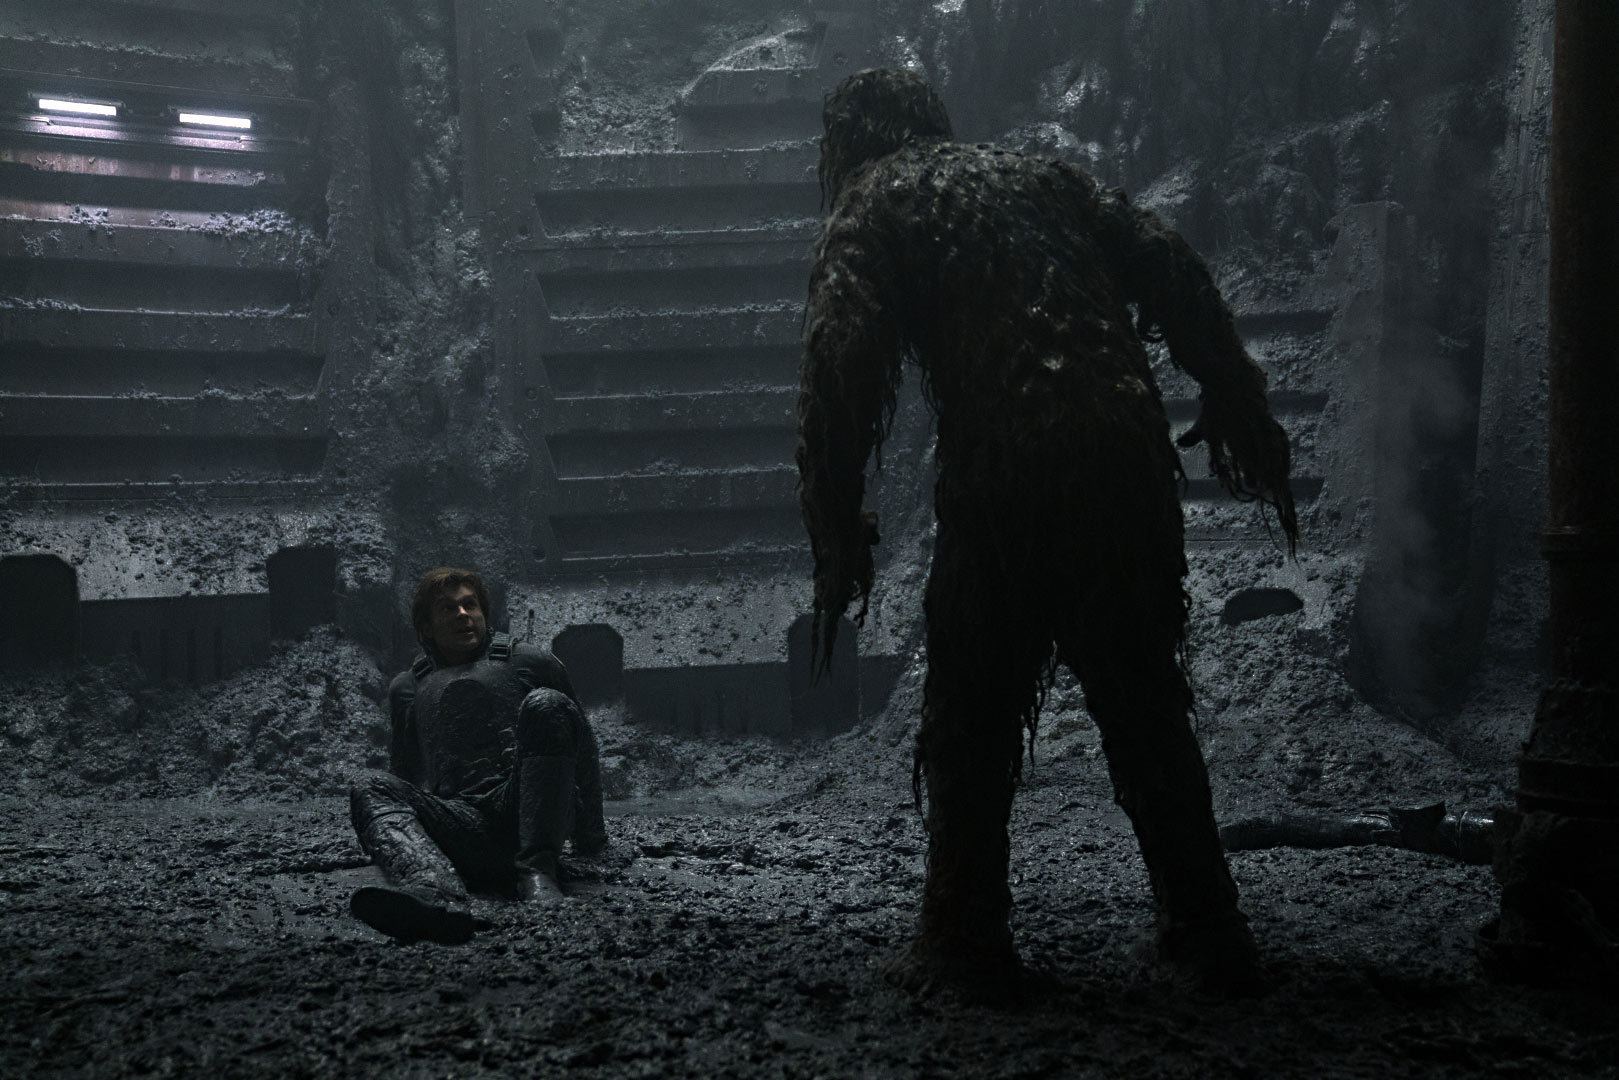 The Beast, it turns out, is a towering, starved Wookiee. The two prisoners fight viciously in the...